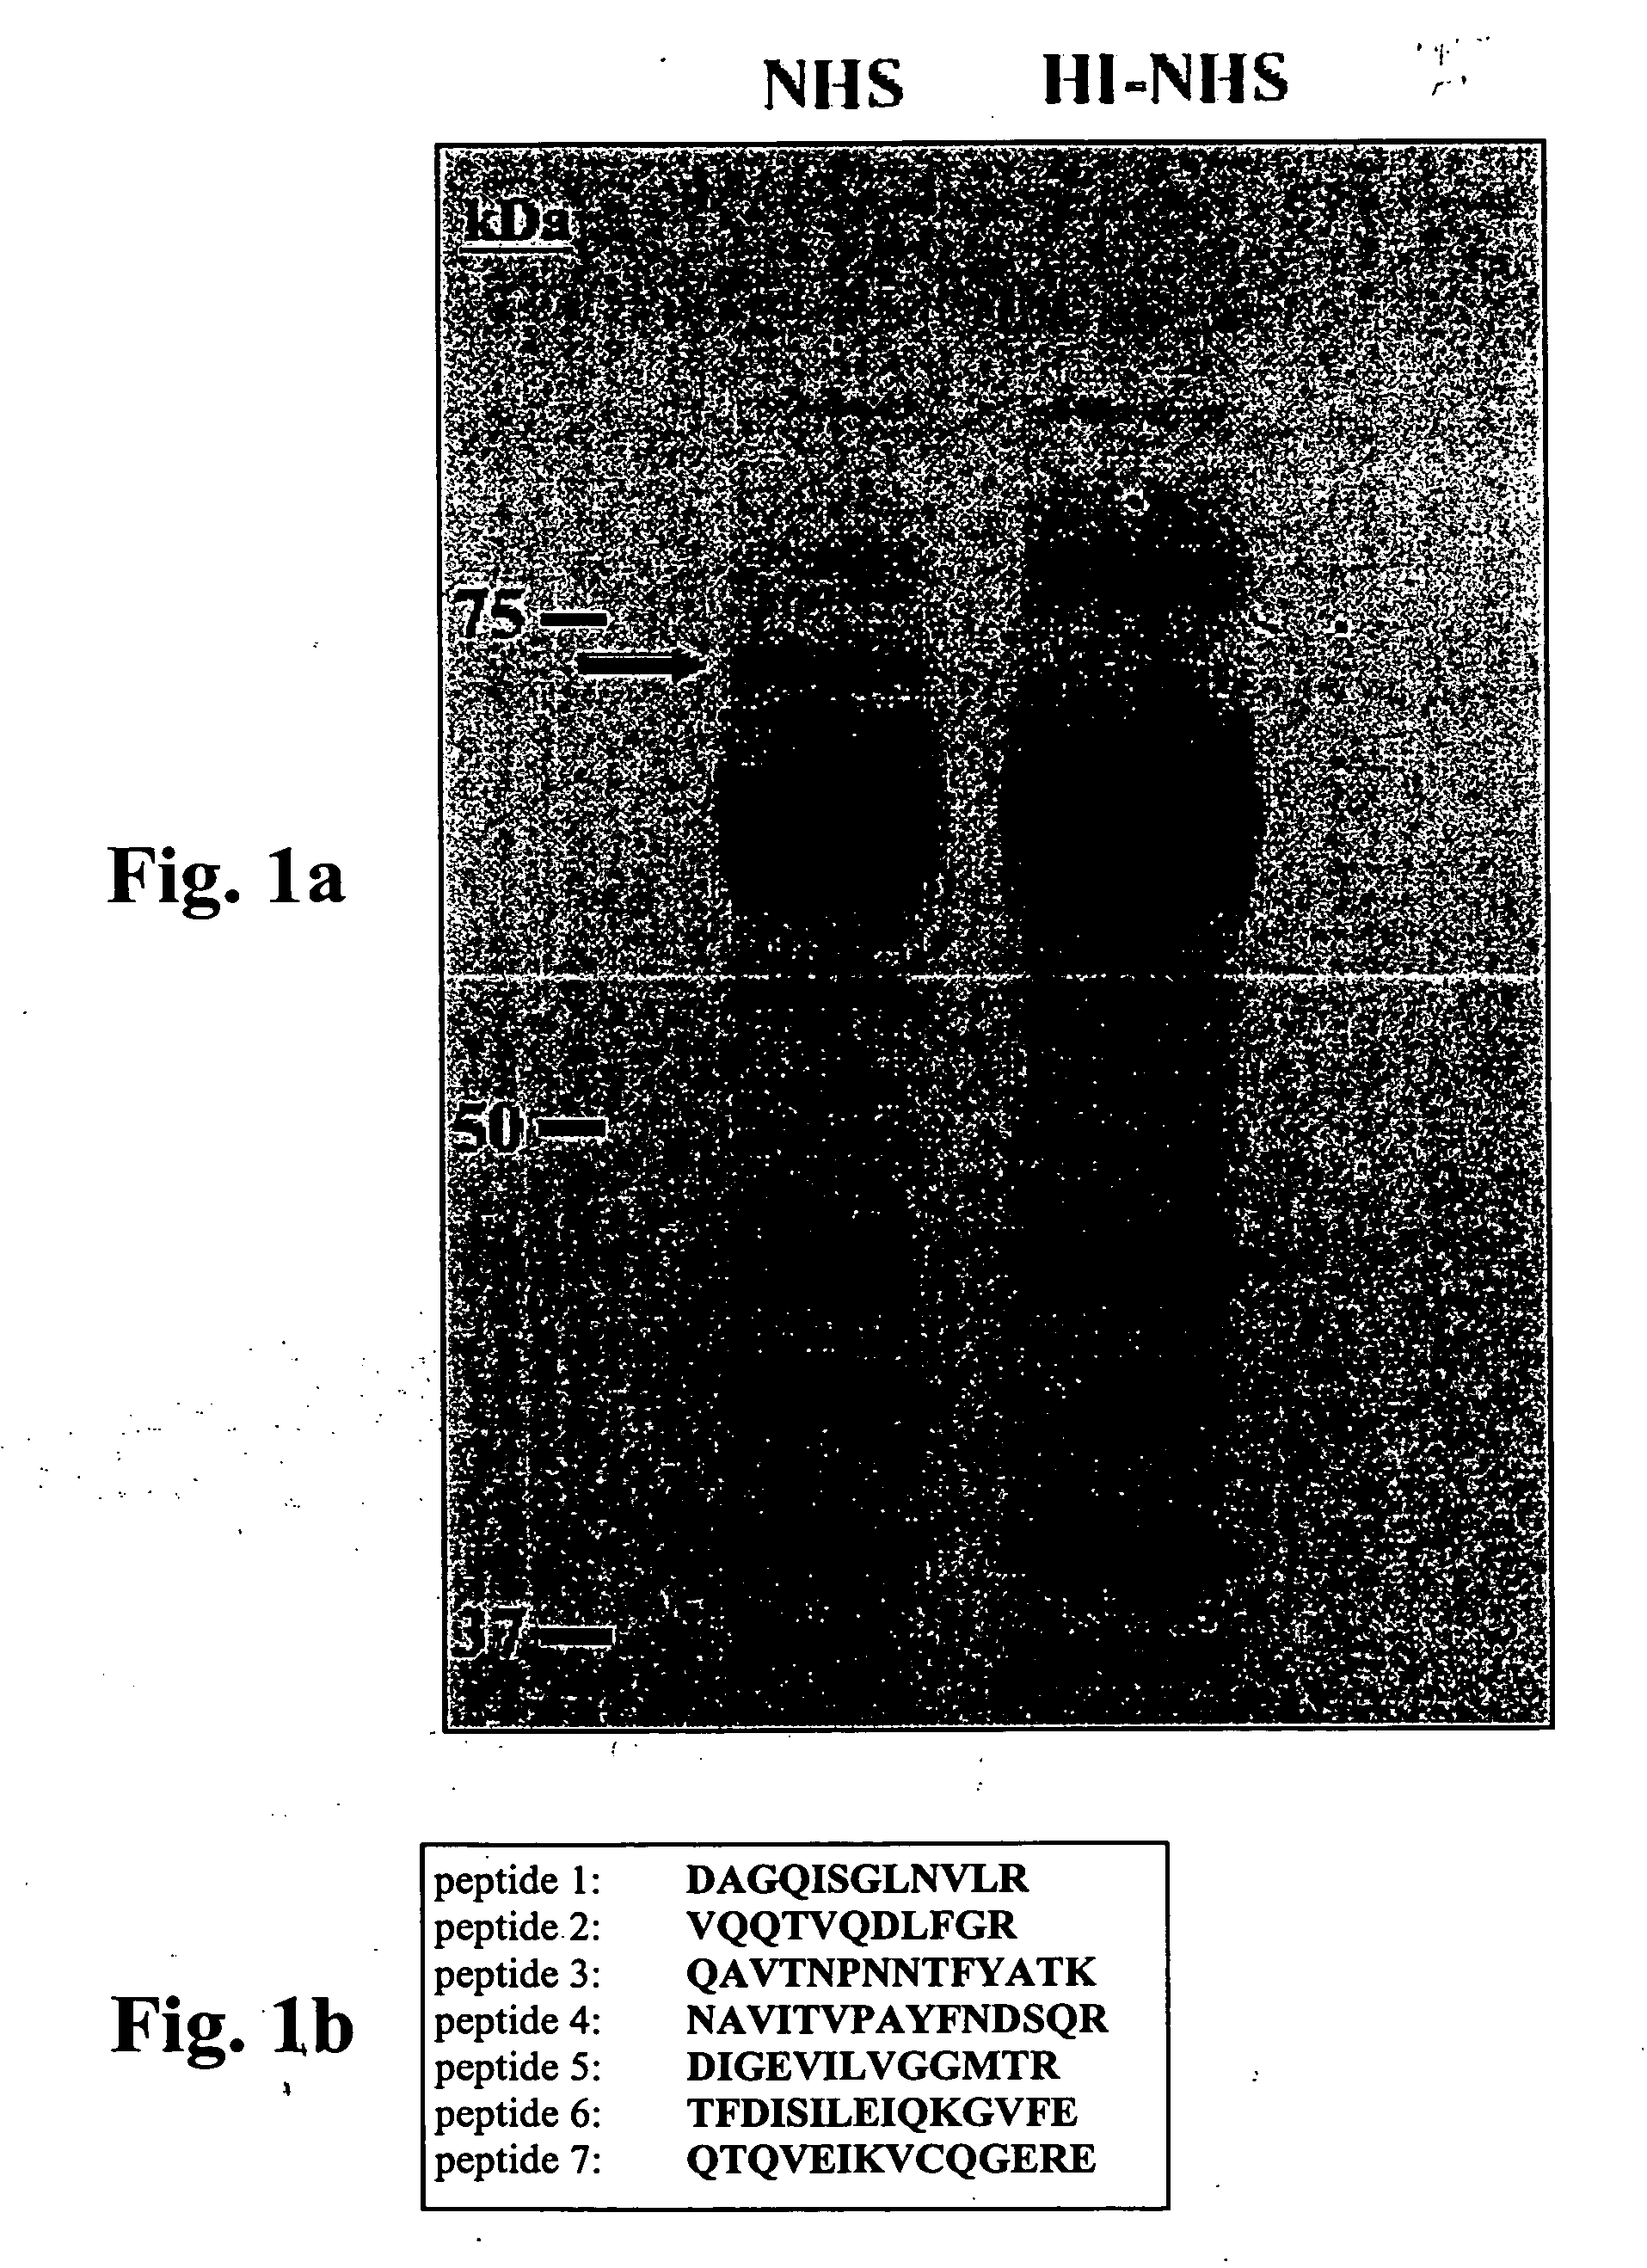 Article of manufacture and method for disease treatment